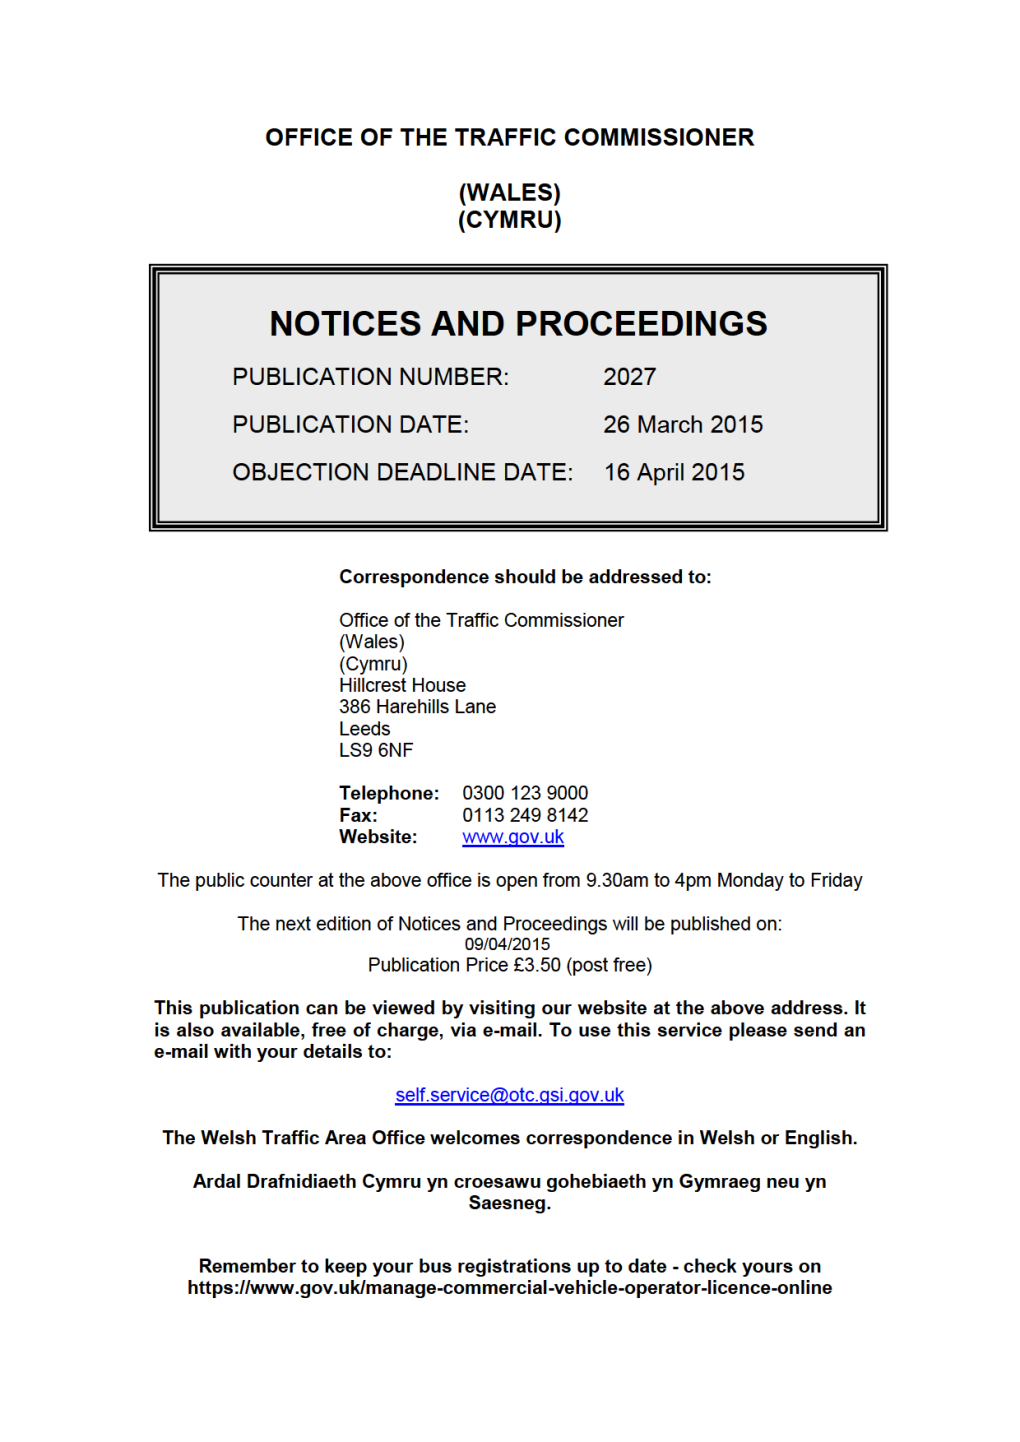 NOTICES and PROCEEDINGS 26 March 2015